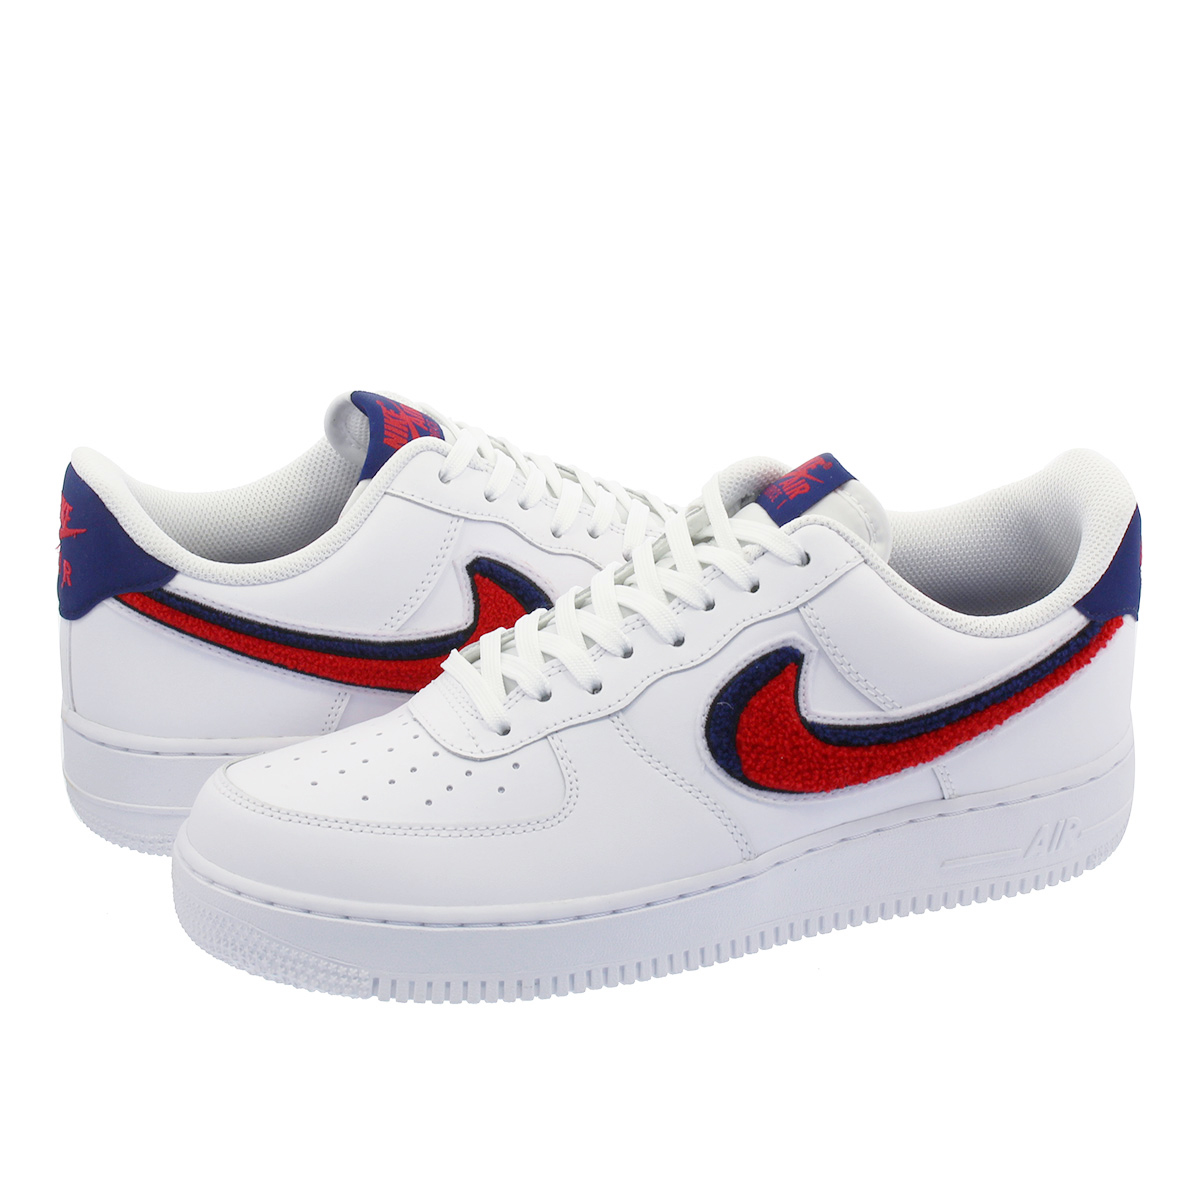 red white and blue air force 1s